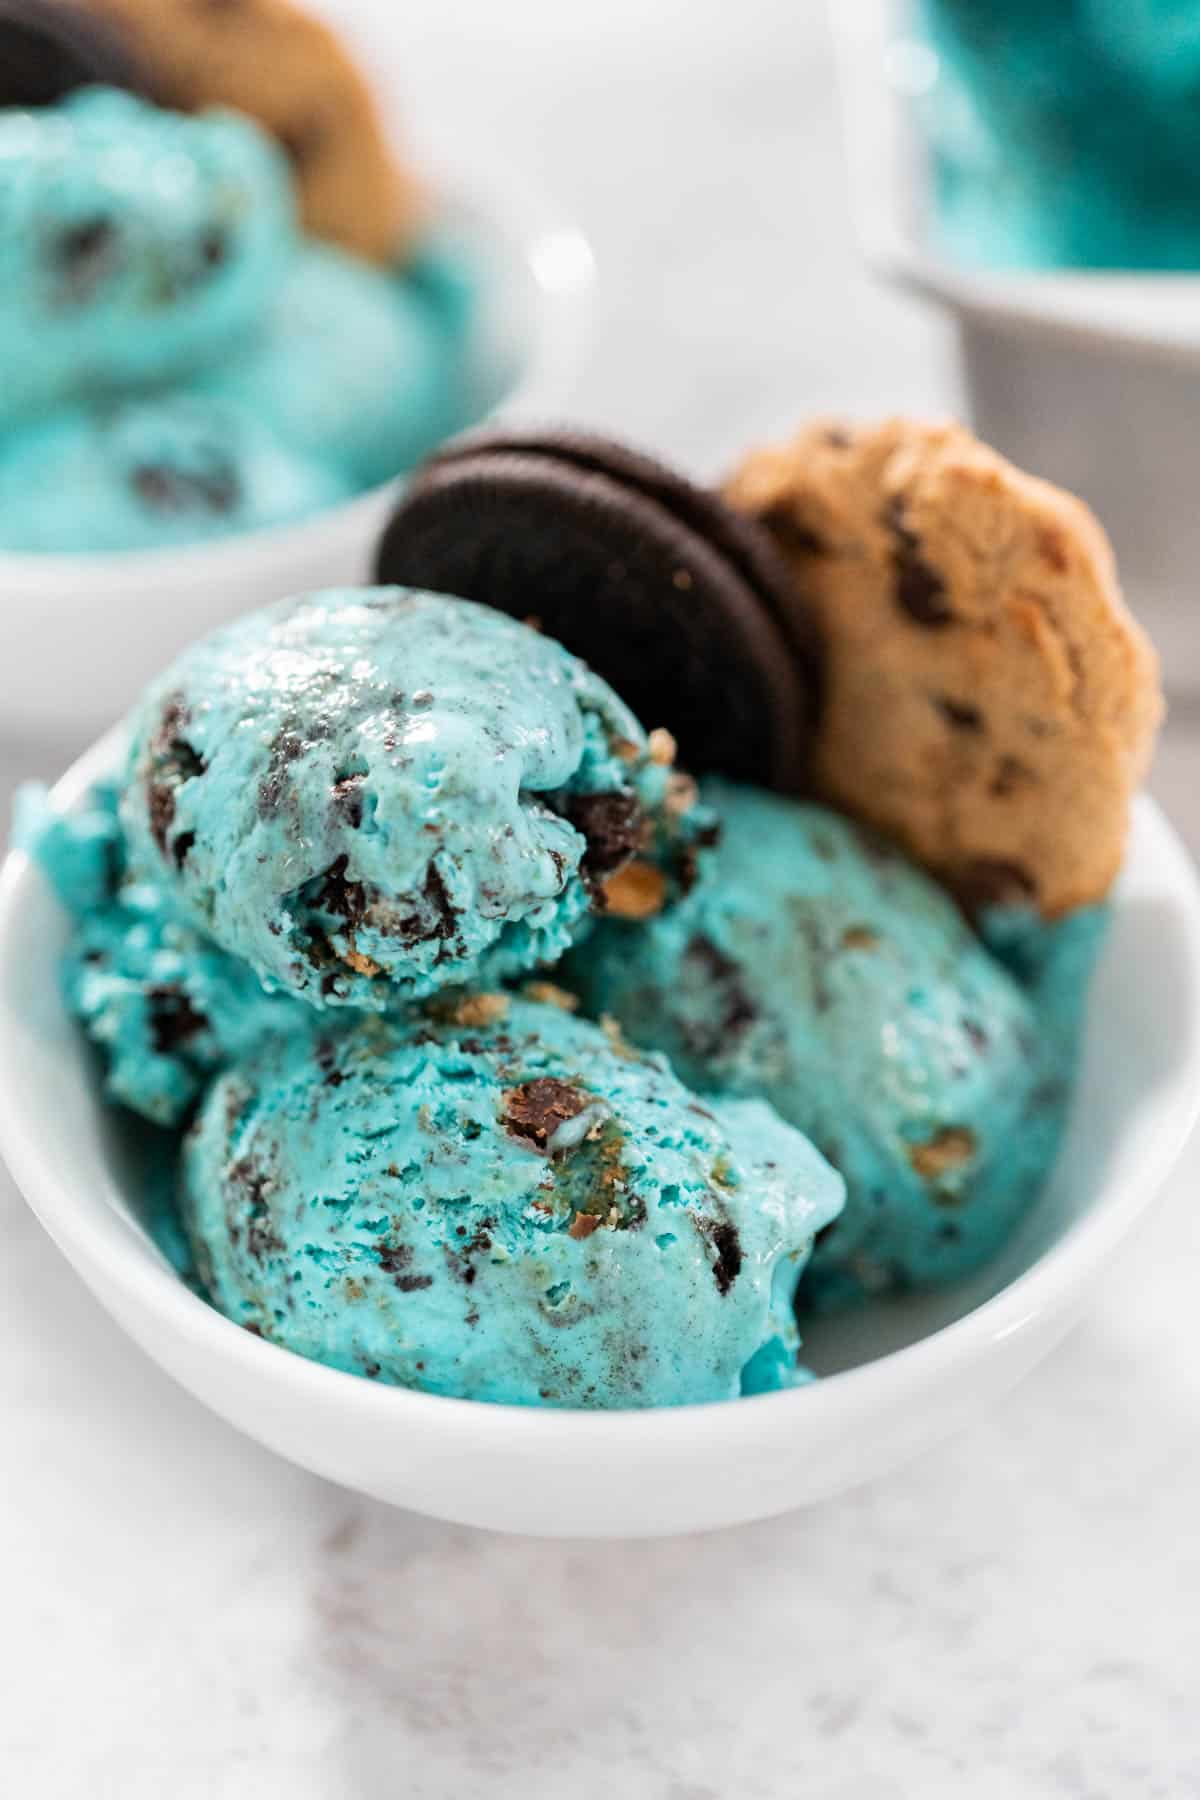 Cookie Monster Ice Cream in a white bowl with three scoops of blue ice cream with Oreos and cookies mixed in. A whole Oreo and cookie are placed in the bowl.